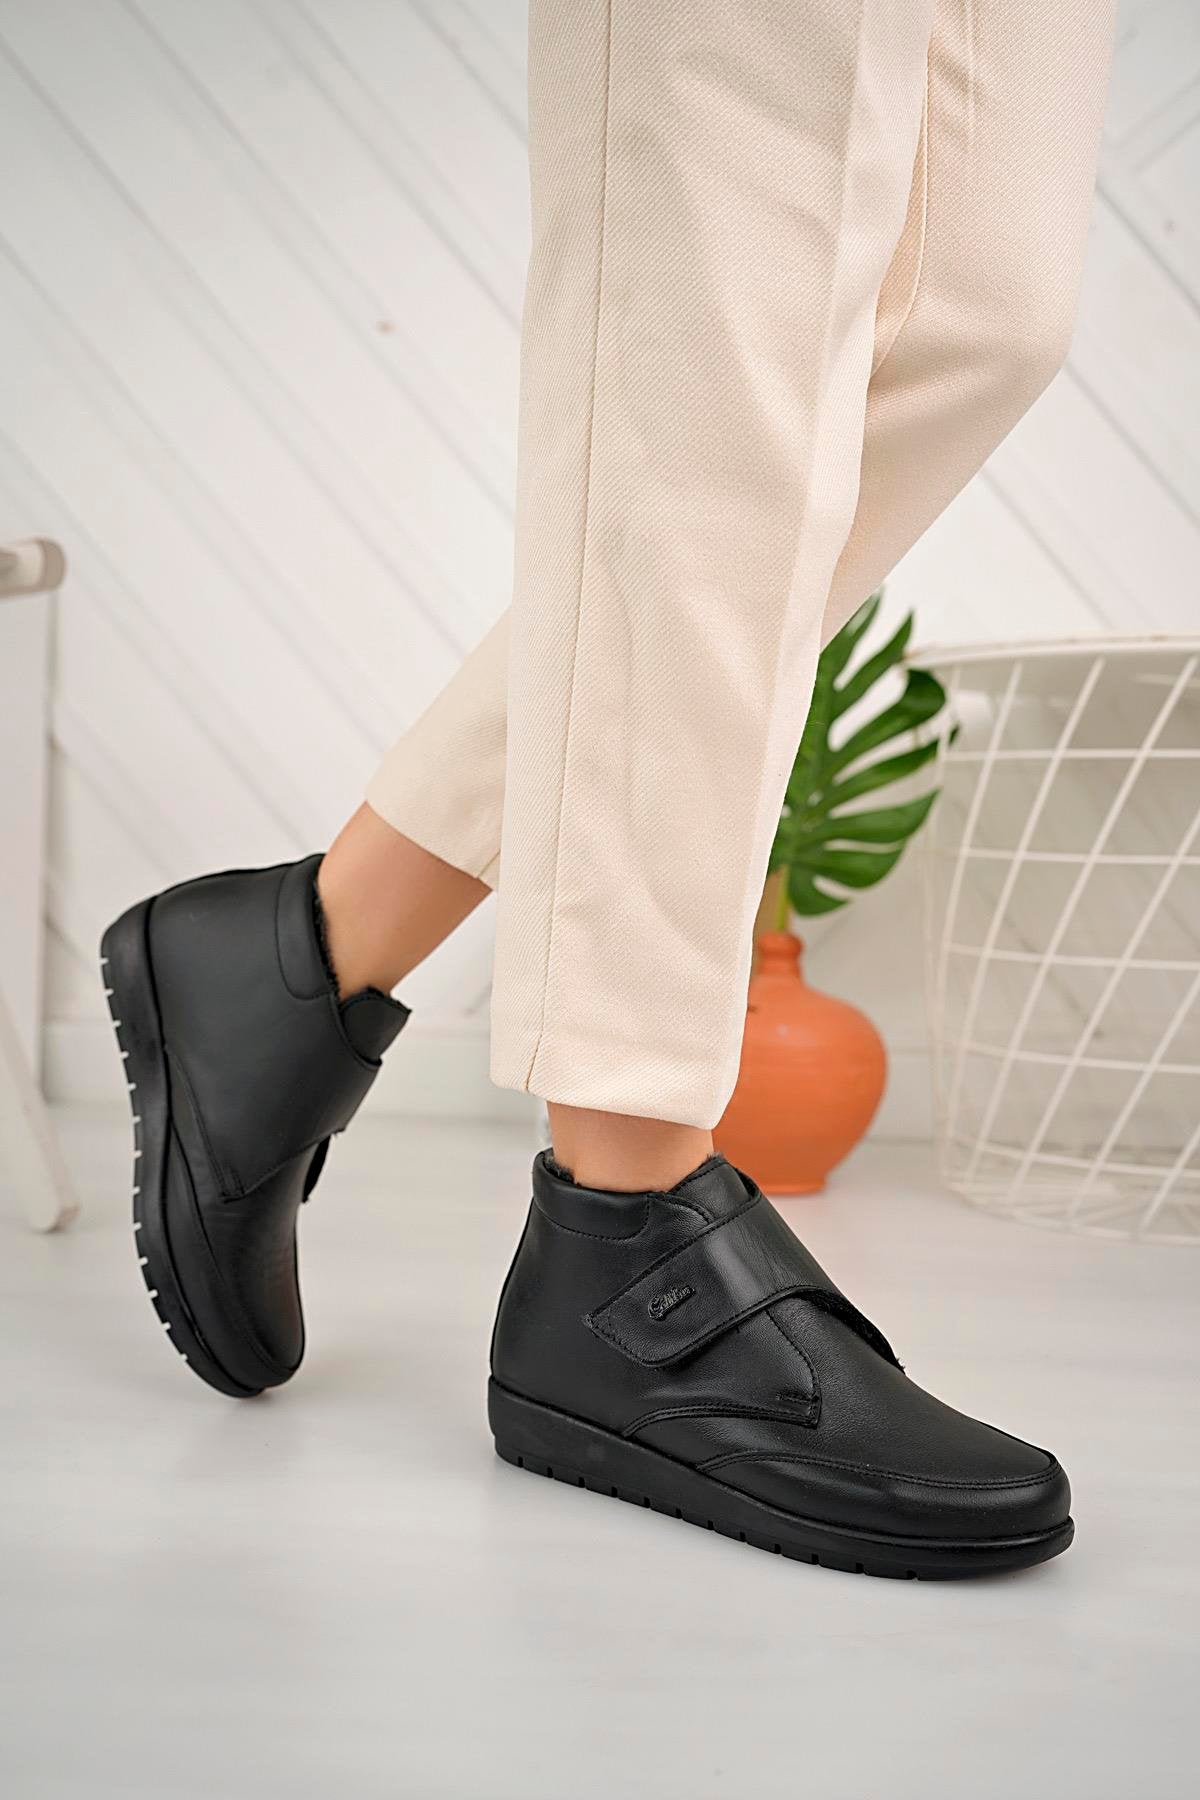 Women's Leather Boots Winter Orthopedic Boots